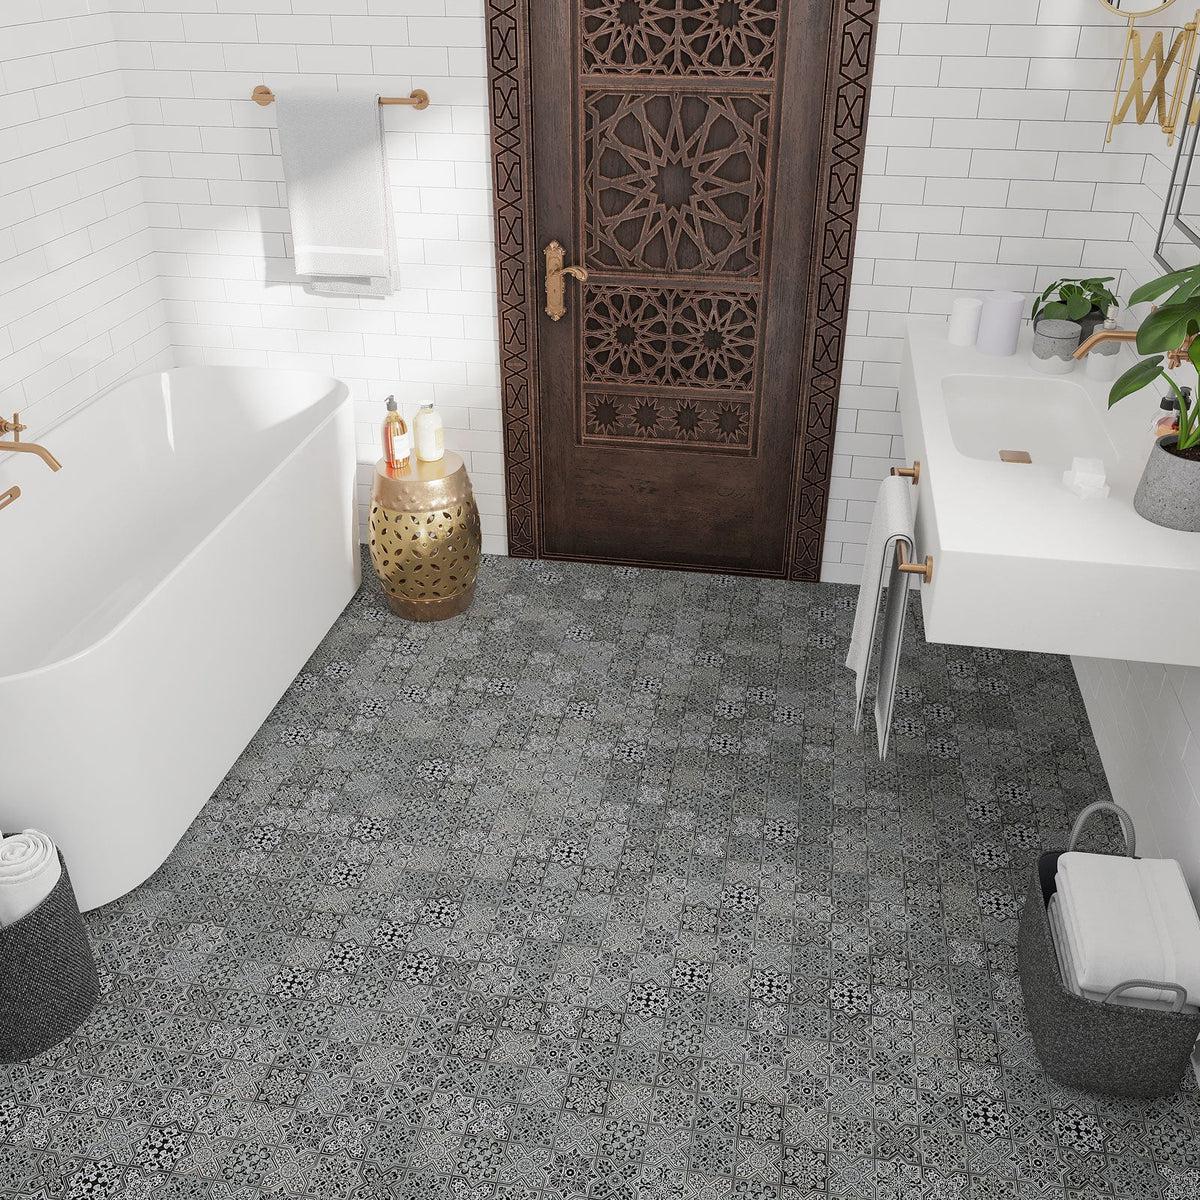 Moroccan bathroom decor with black and white patterned tile flooring